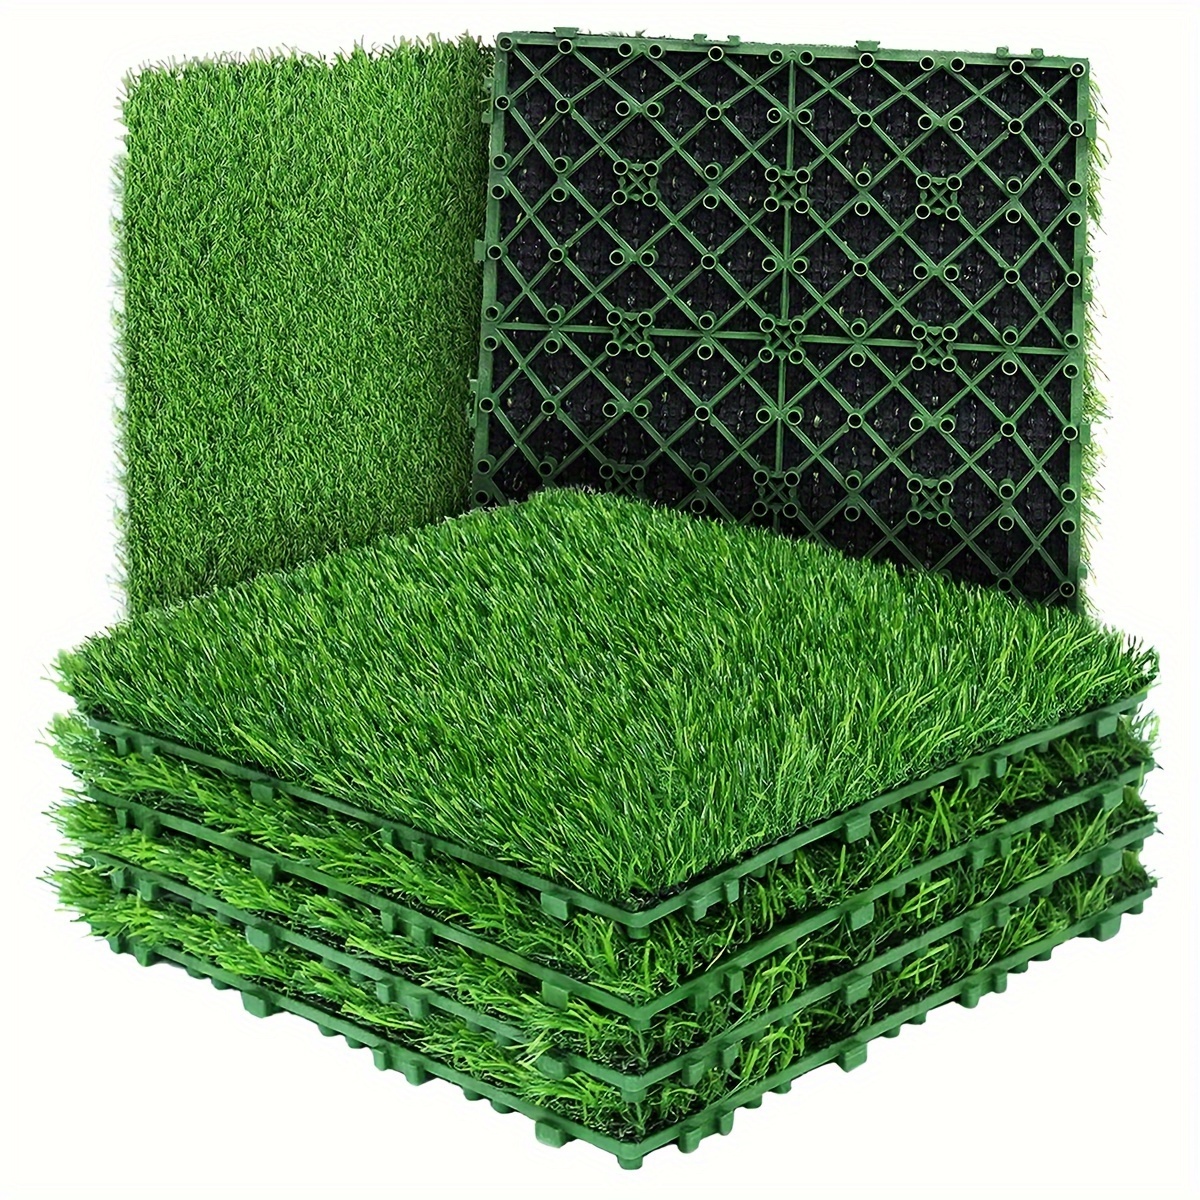 

6pcs Fake Grass Artificial Turf, Simulation Lawn For Pets Potty Training, Plastic Green Carpet For Outdoor And Indoor, Garden Playground Decoration Grass, Artificial Lawn